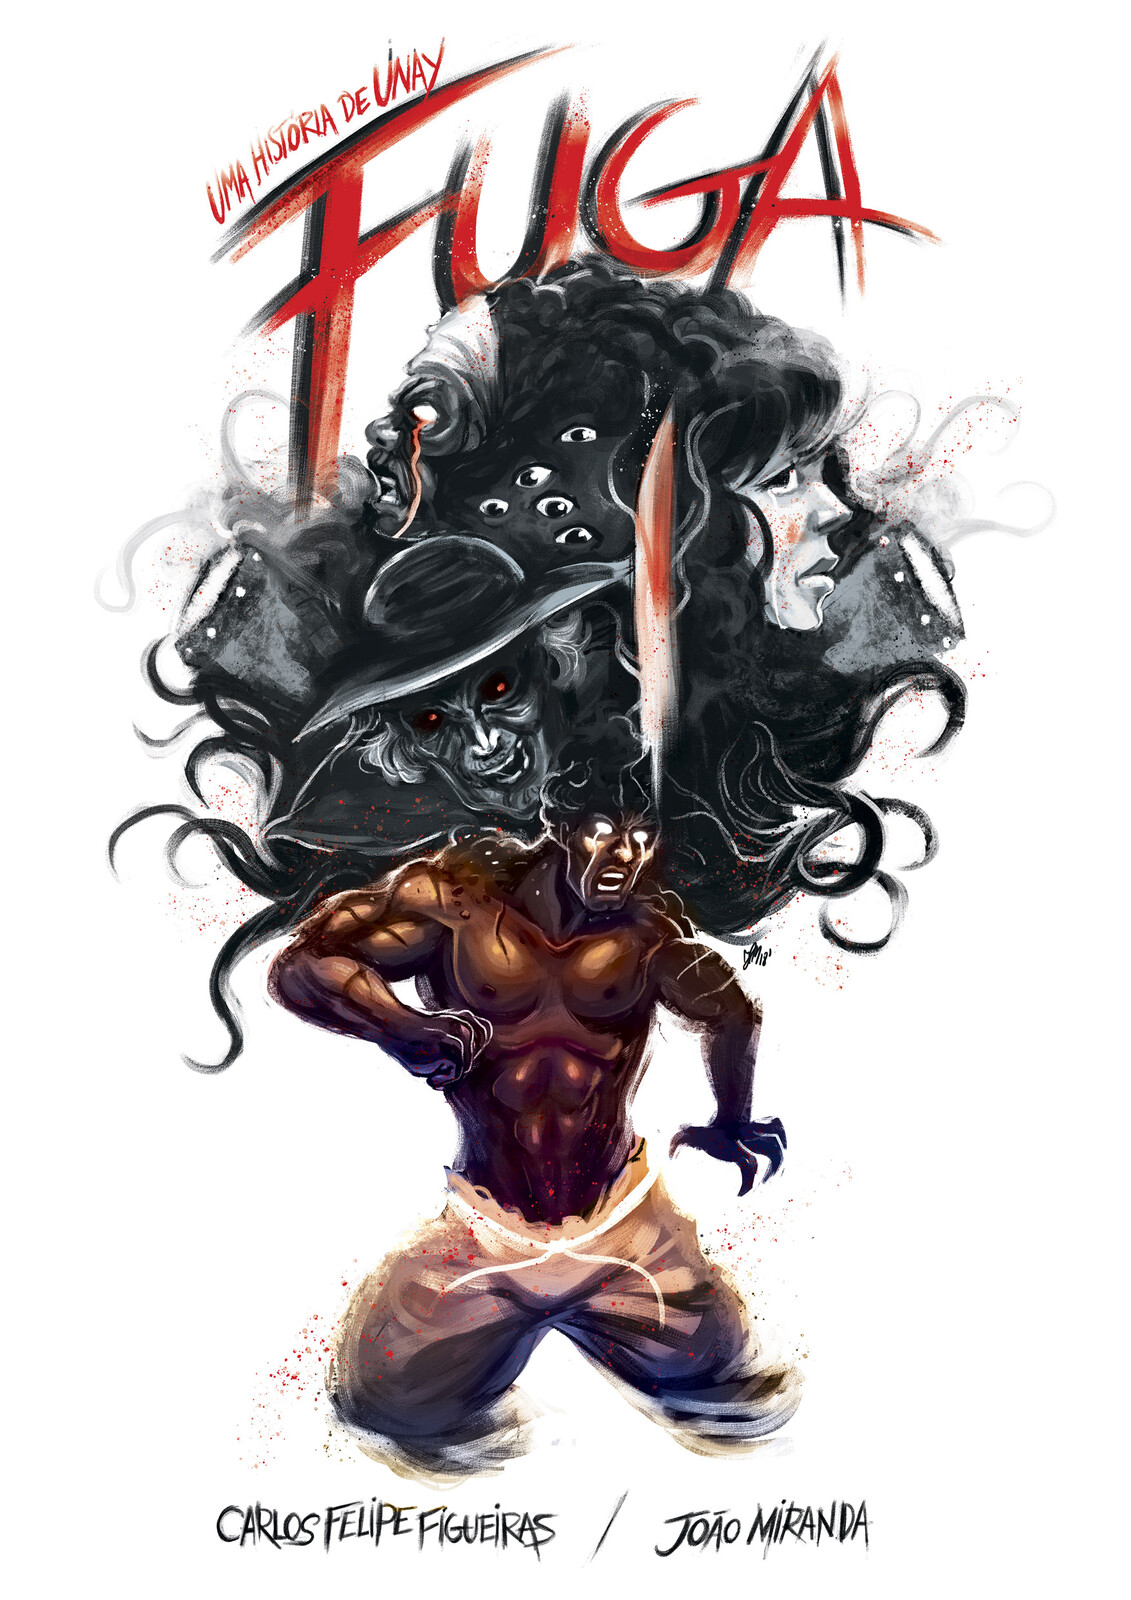 Fuga (Escape) is a 10 page comic book for UNAY anthology. written by Carlos Felipe Figueiras.